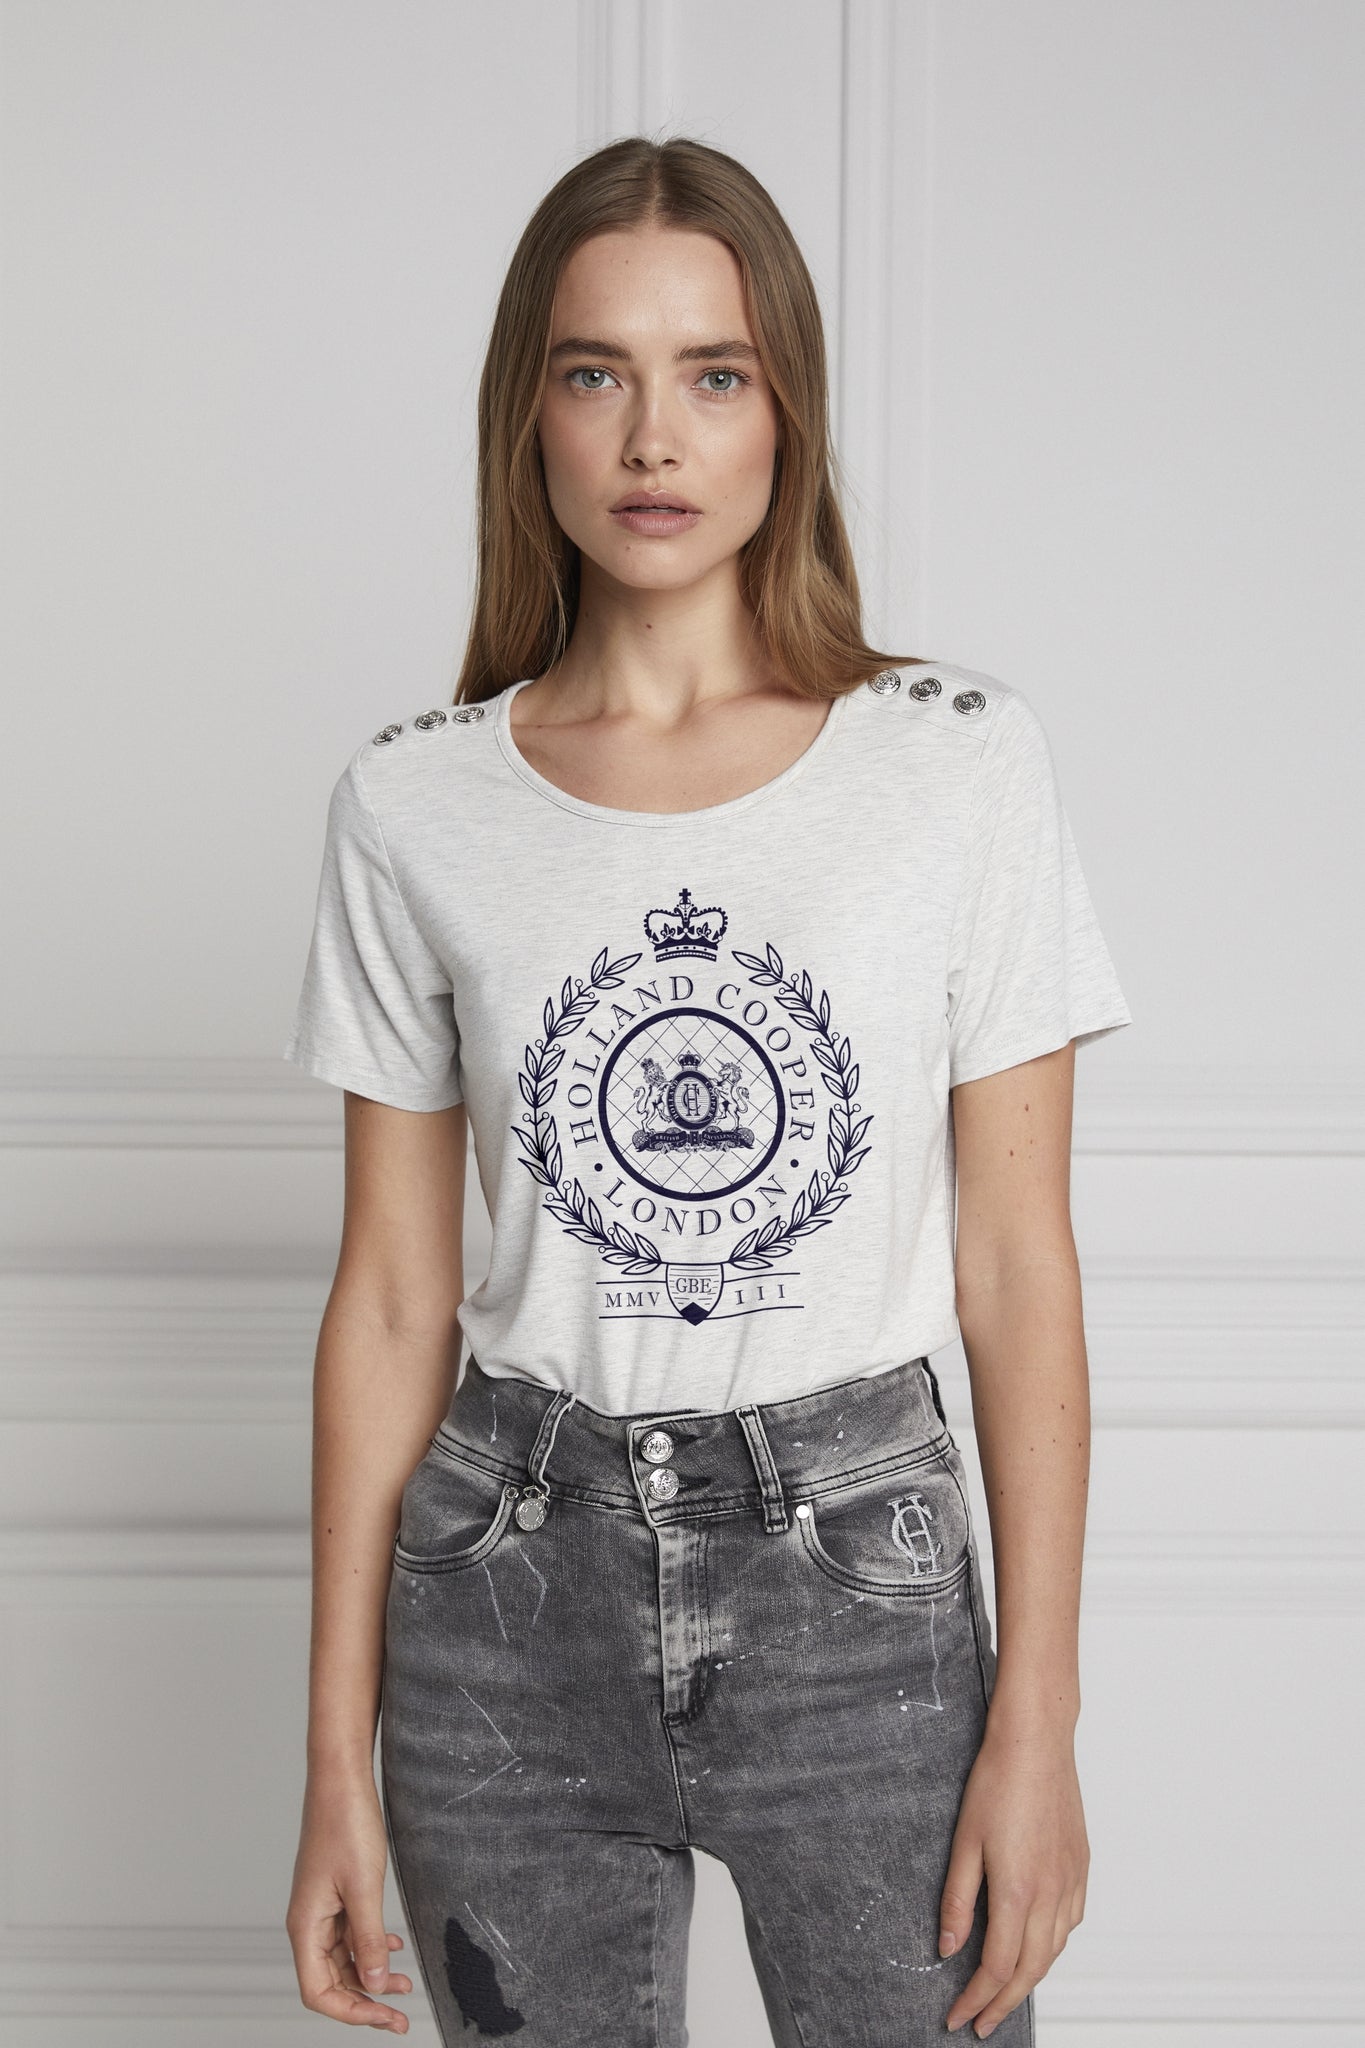 Holland Cooper Ornate Crest Tee Ladies T-Shirt in Ice Marle & Navy